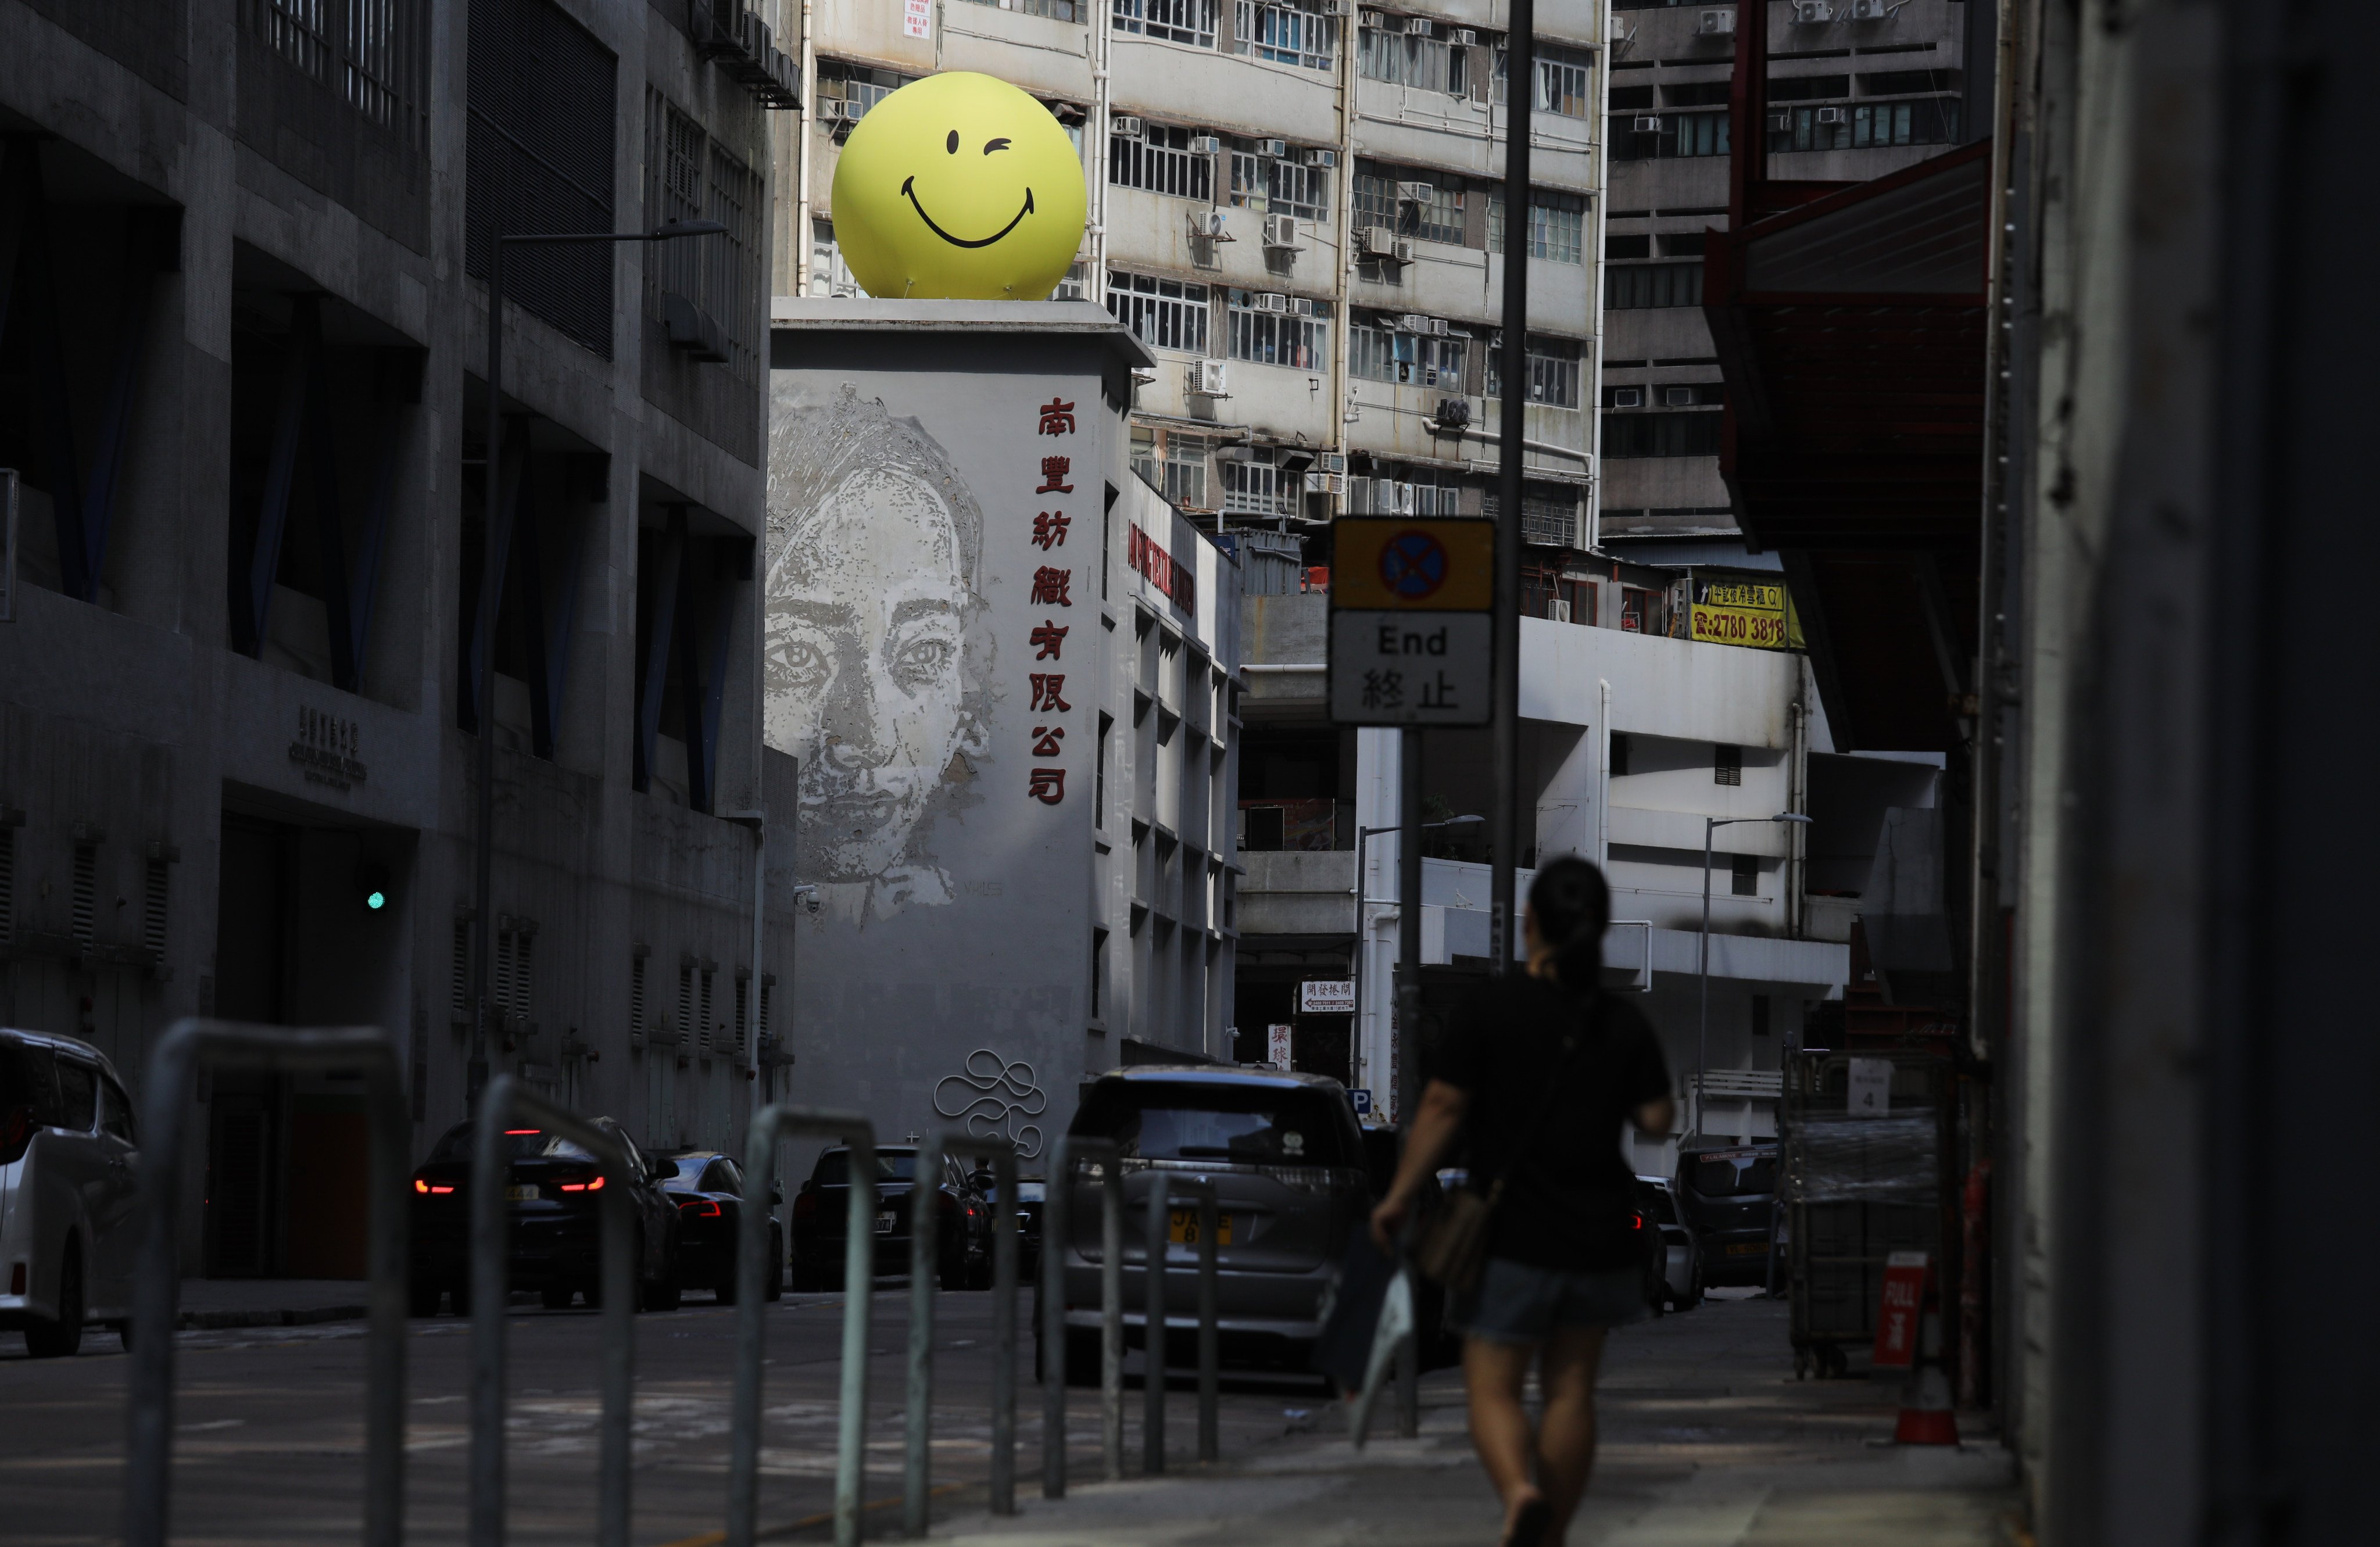 A smiling face sits atop The Mills in Tsuen Wan as a response to World Smile Day and World Mental Health Day in October. Photo: Xiaomei Chen